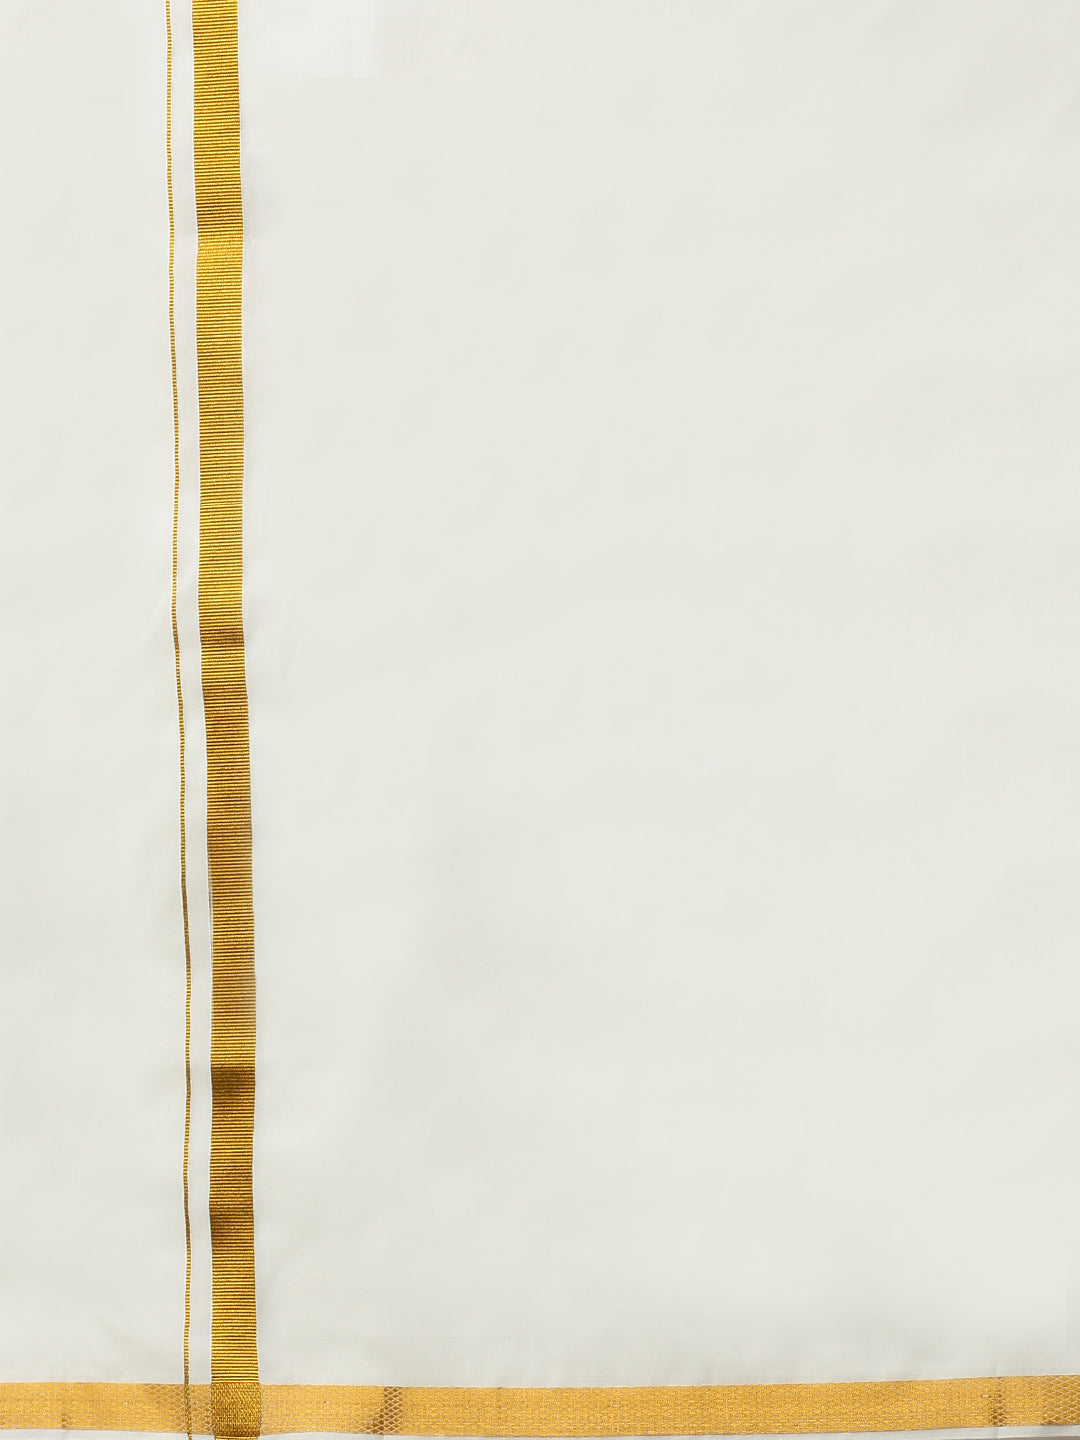 Mens Double Dhoti Cream with Gold Jari Border Gold Mineral